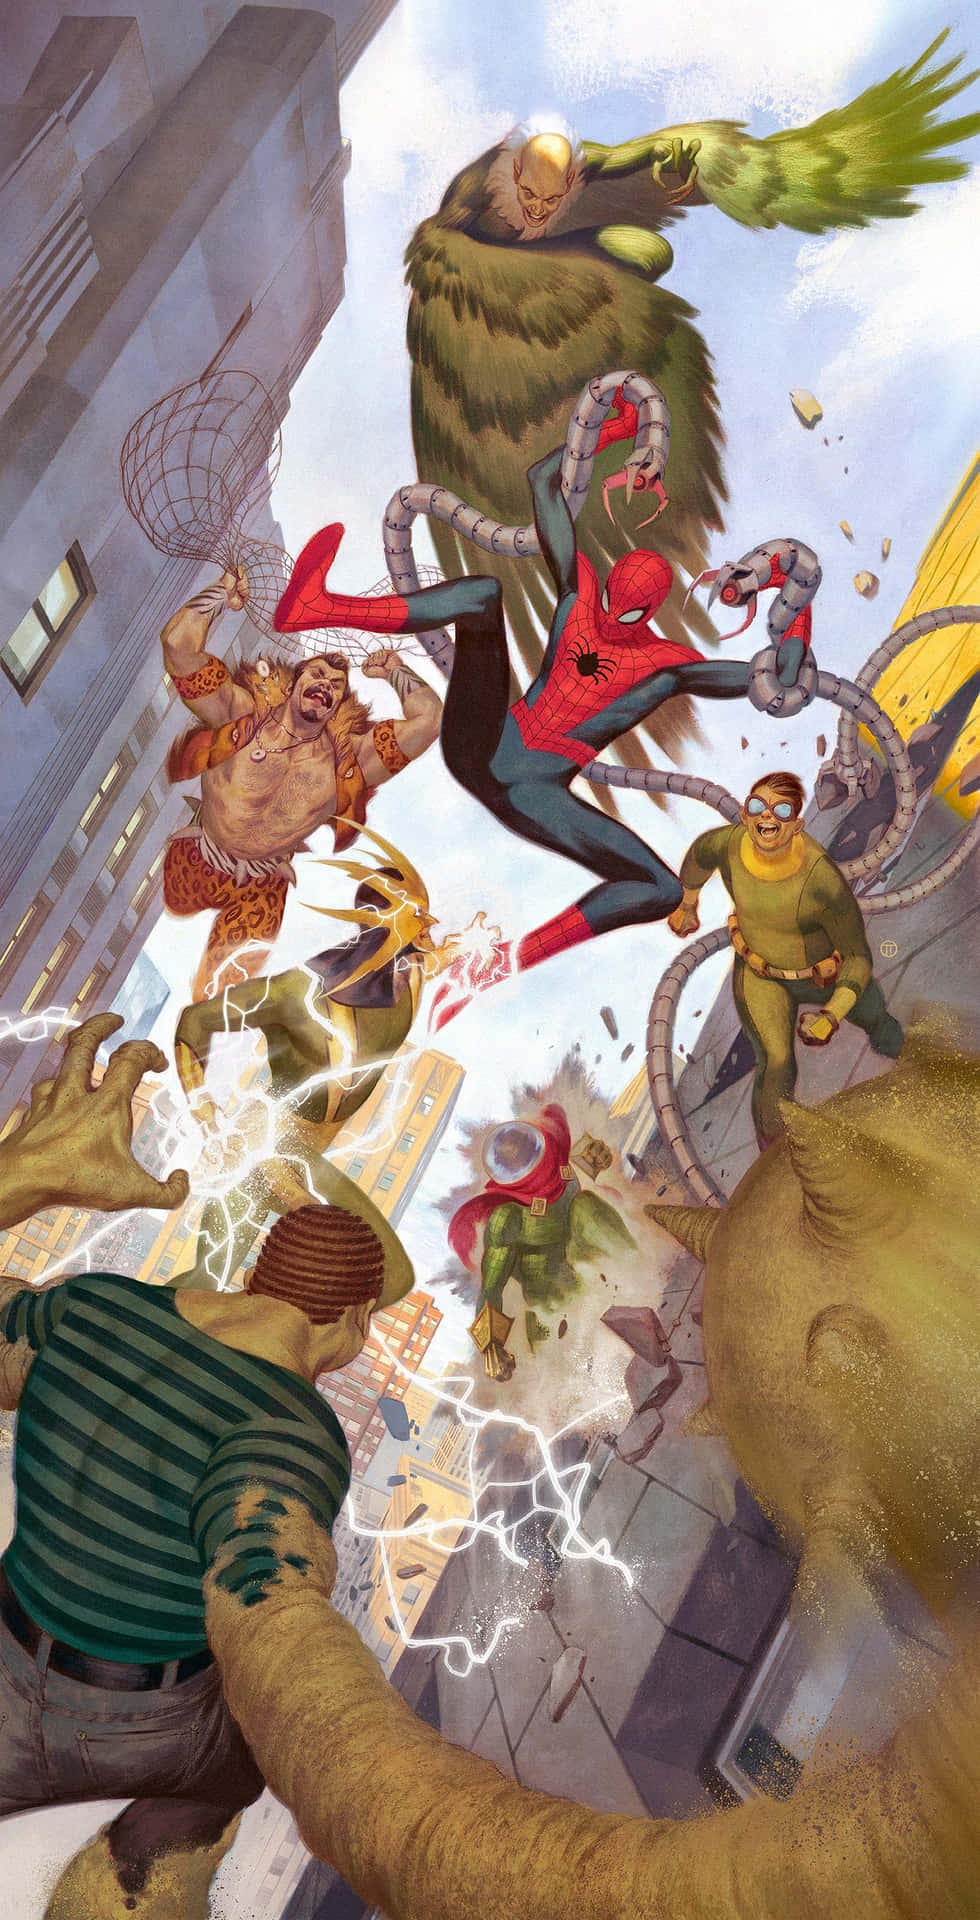 Caption: Sinister Six - Meet the Fearsome Foes of Spider-Man! Wallpaper